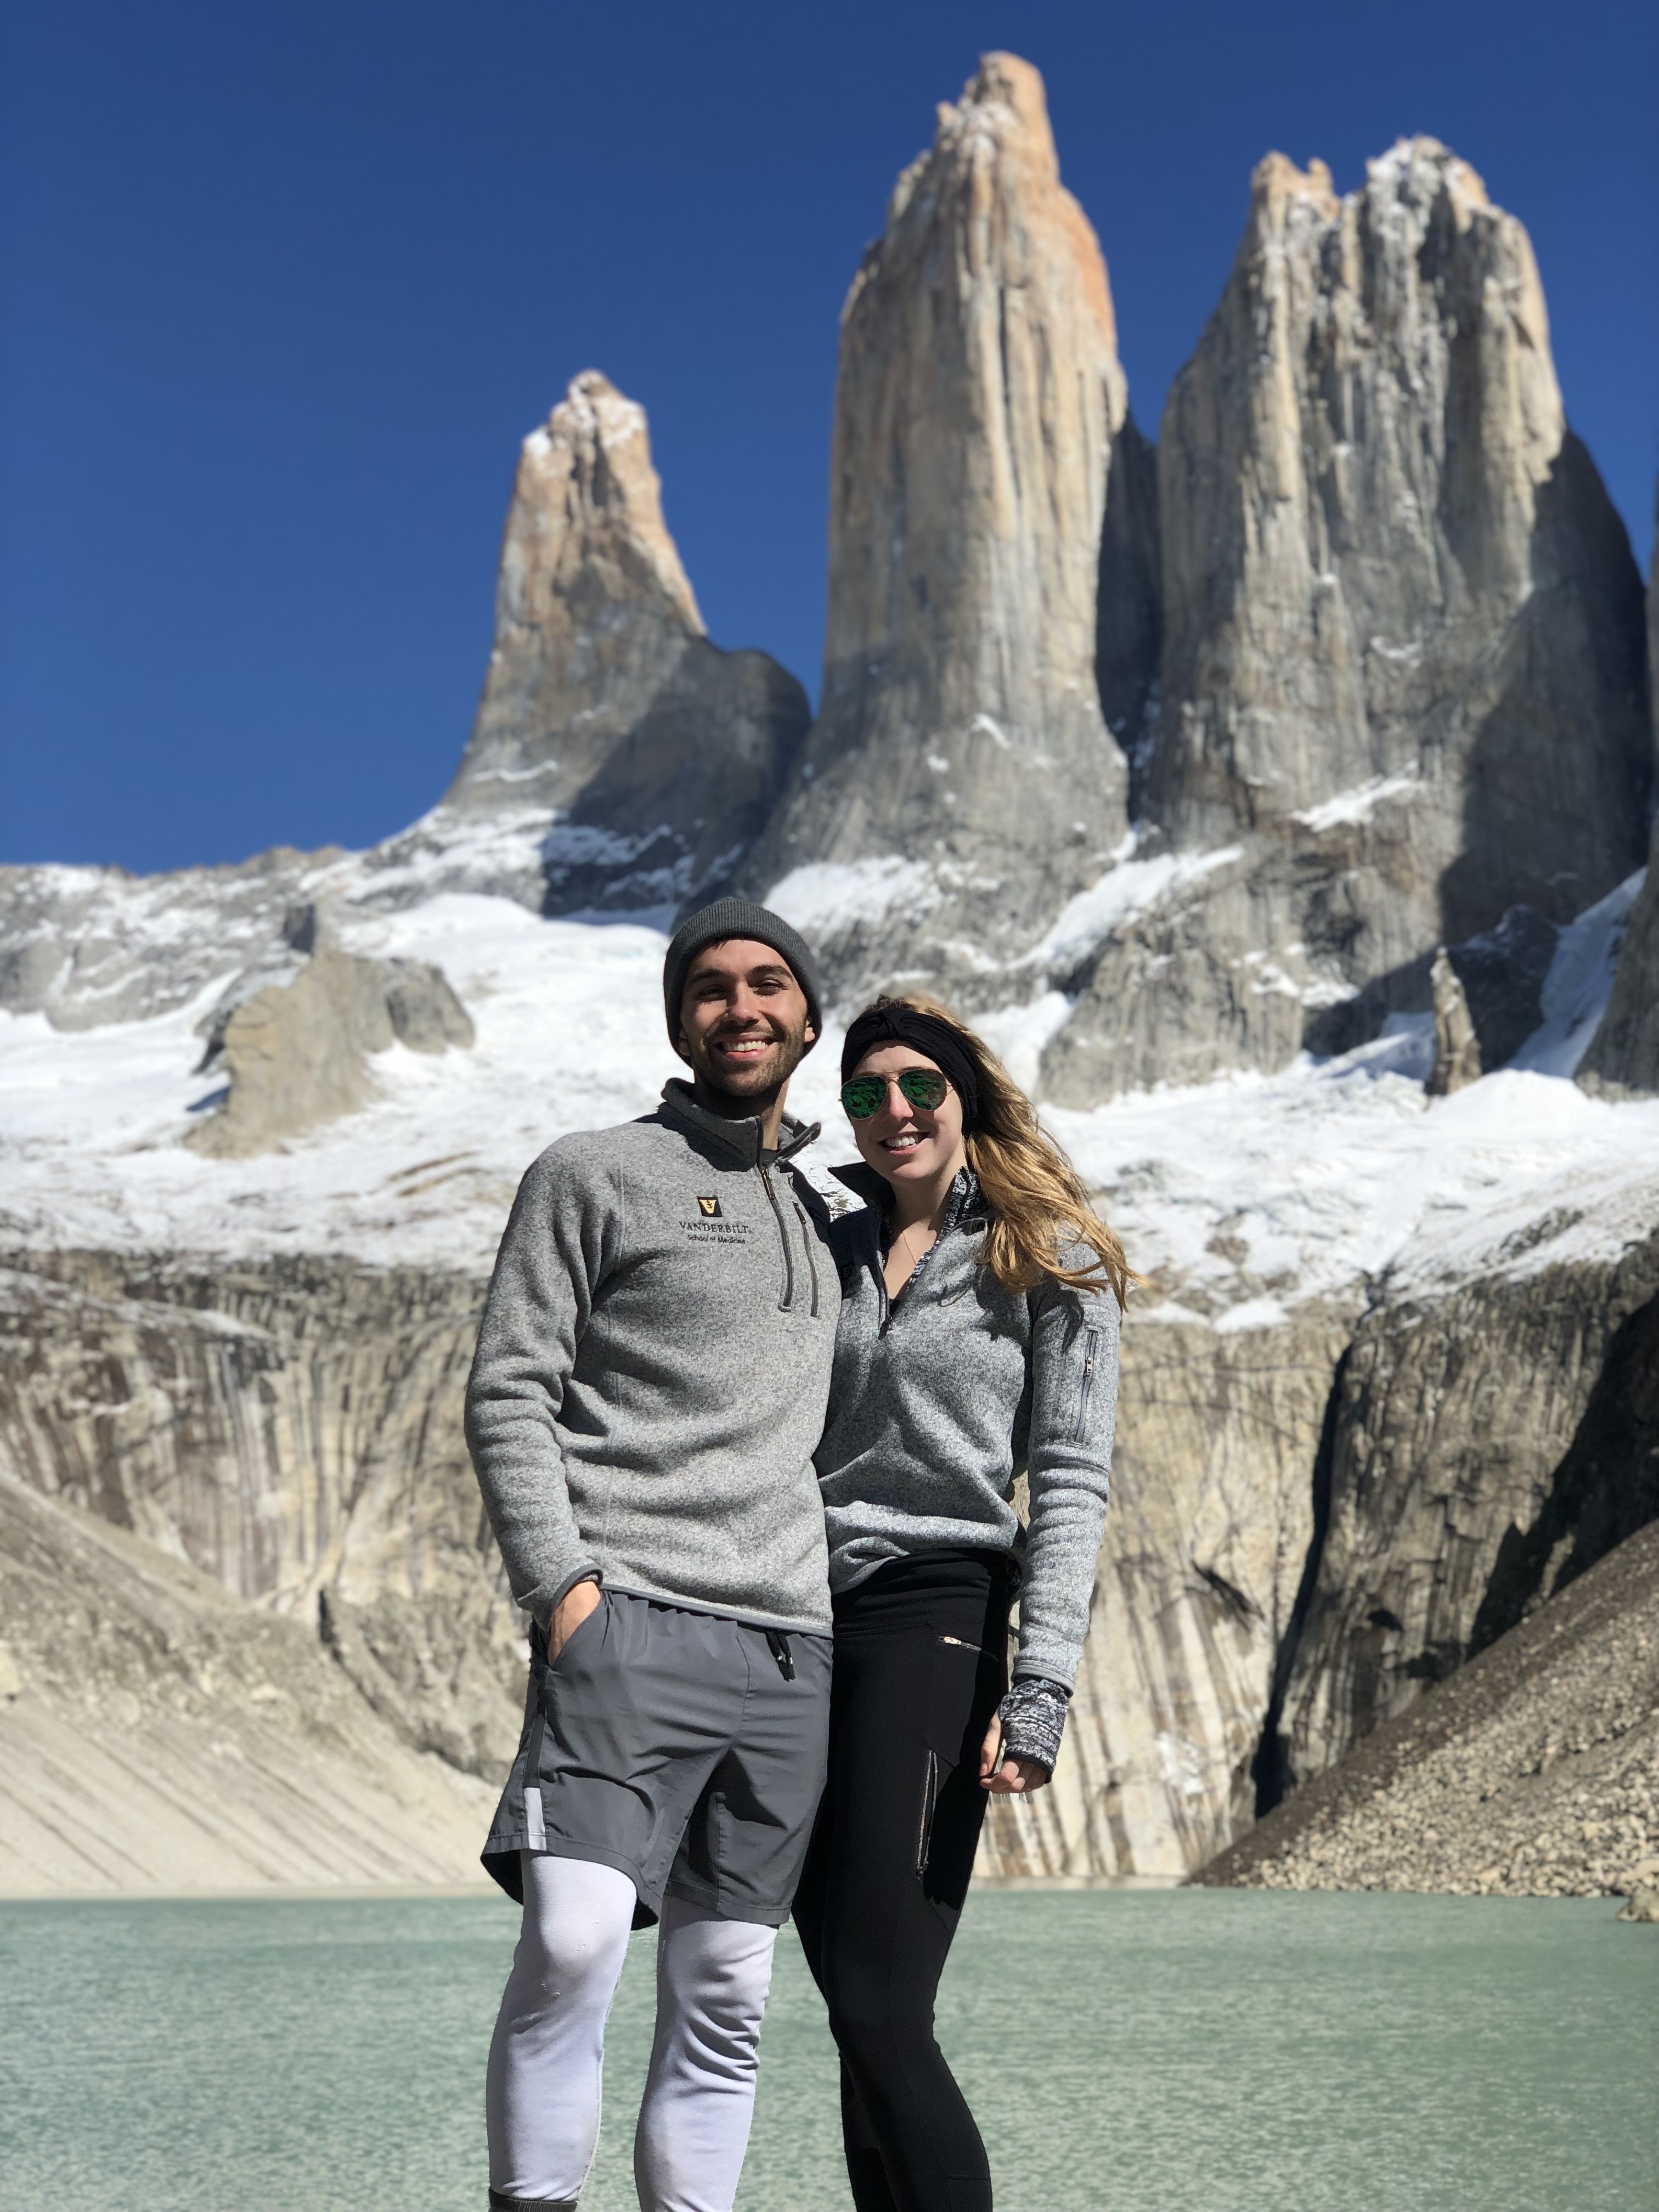 Two people in gray fleeces stand in front of a snowy mountain